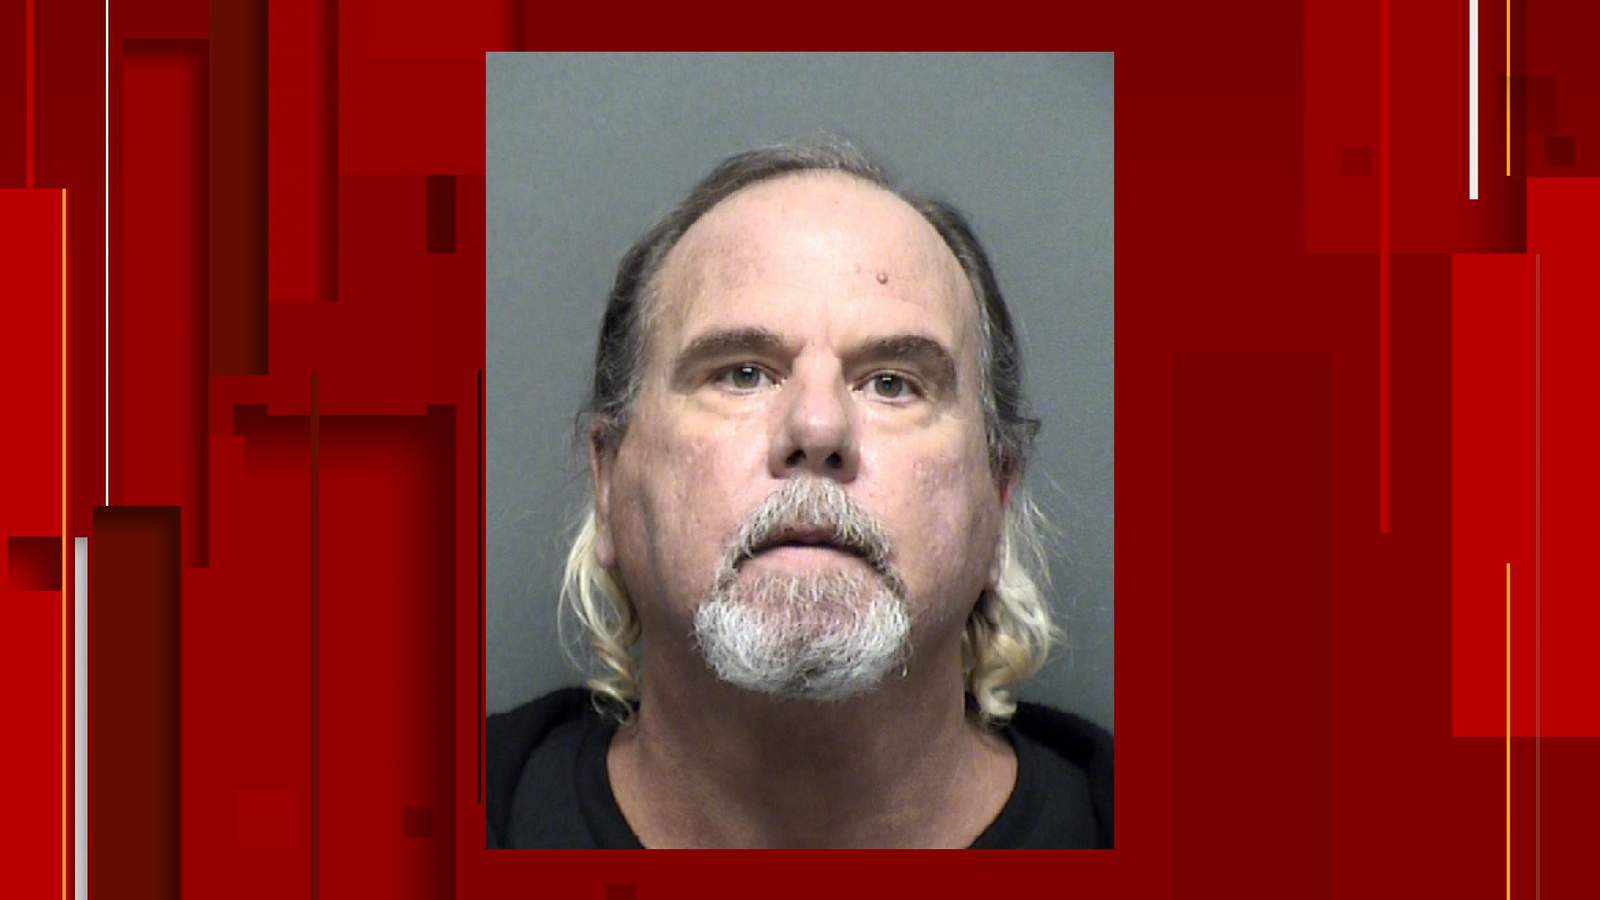 Retired SAPD detective who pulled gun on man outside Home Depot arrested, released on bond